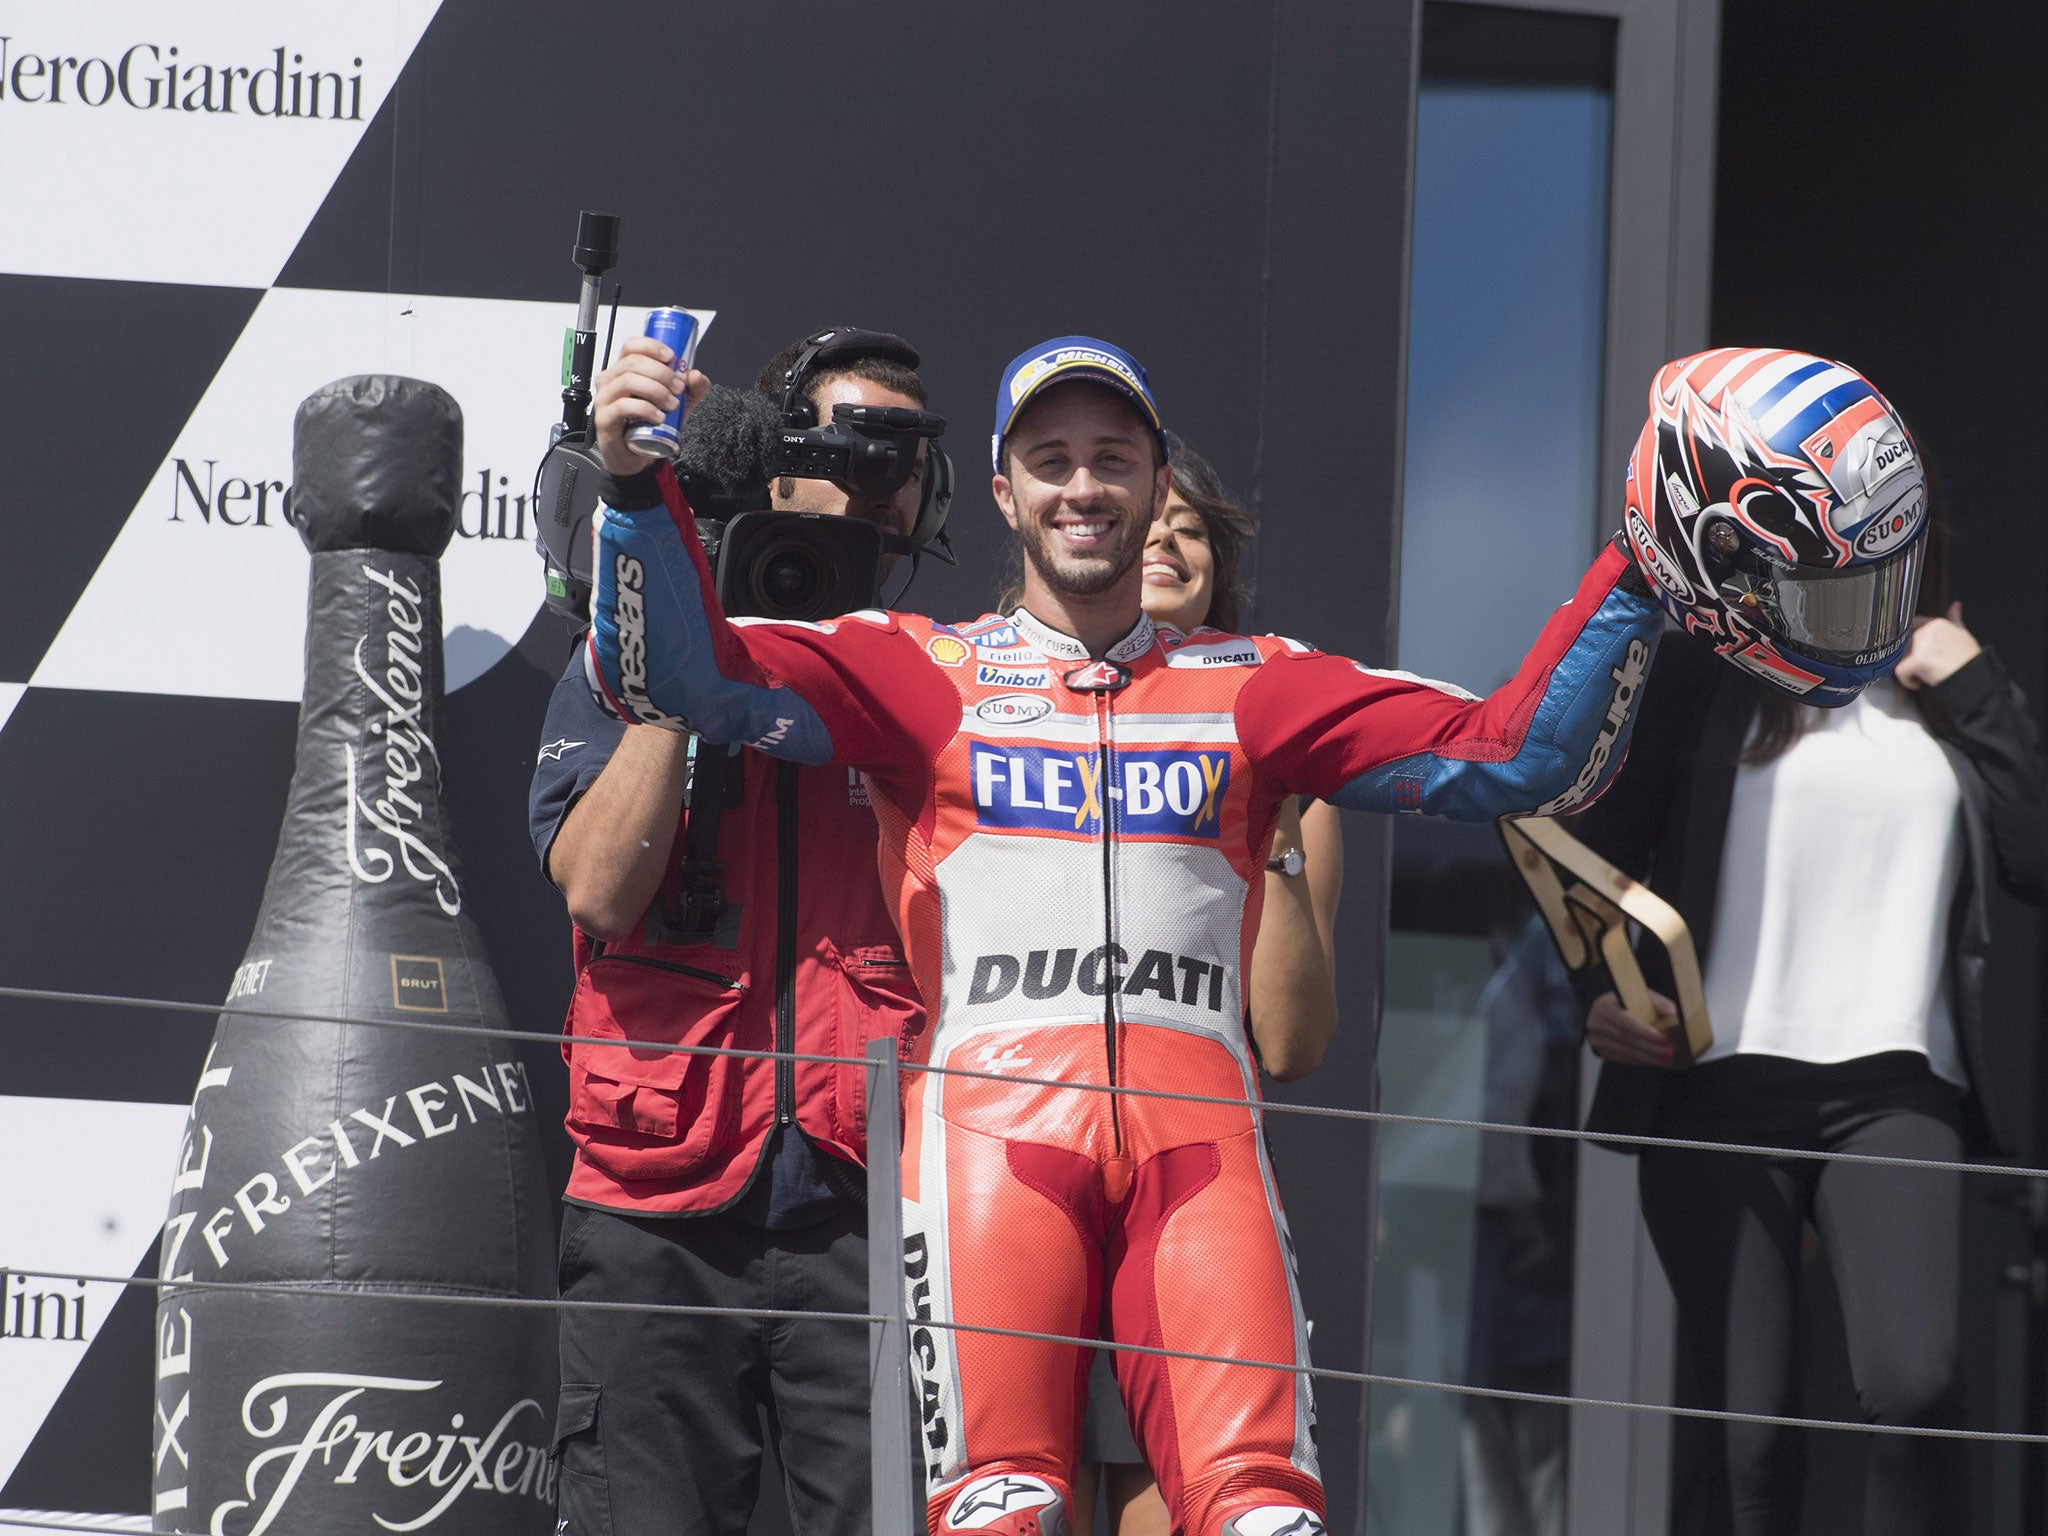 Dovizioso moved up to second in the championship table